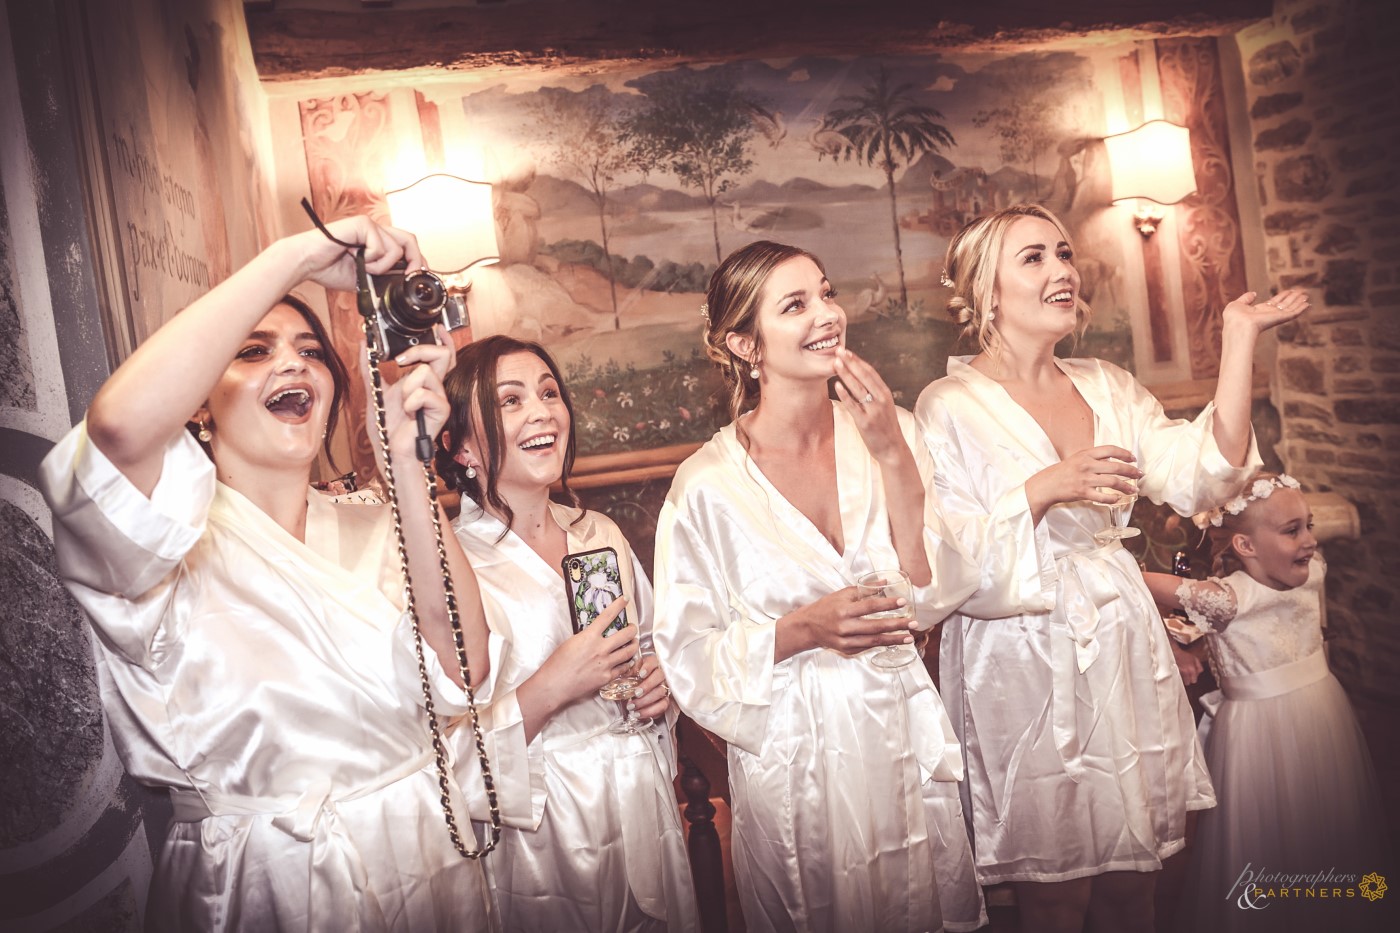 The reaction of the bridesmaids.